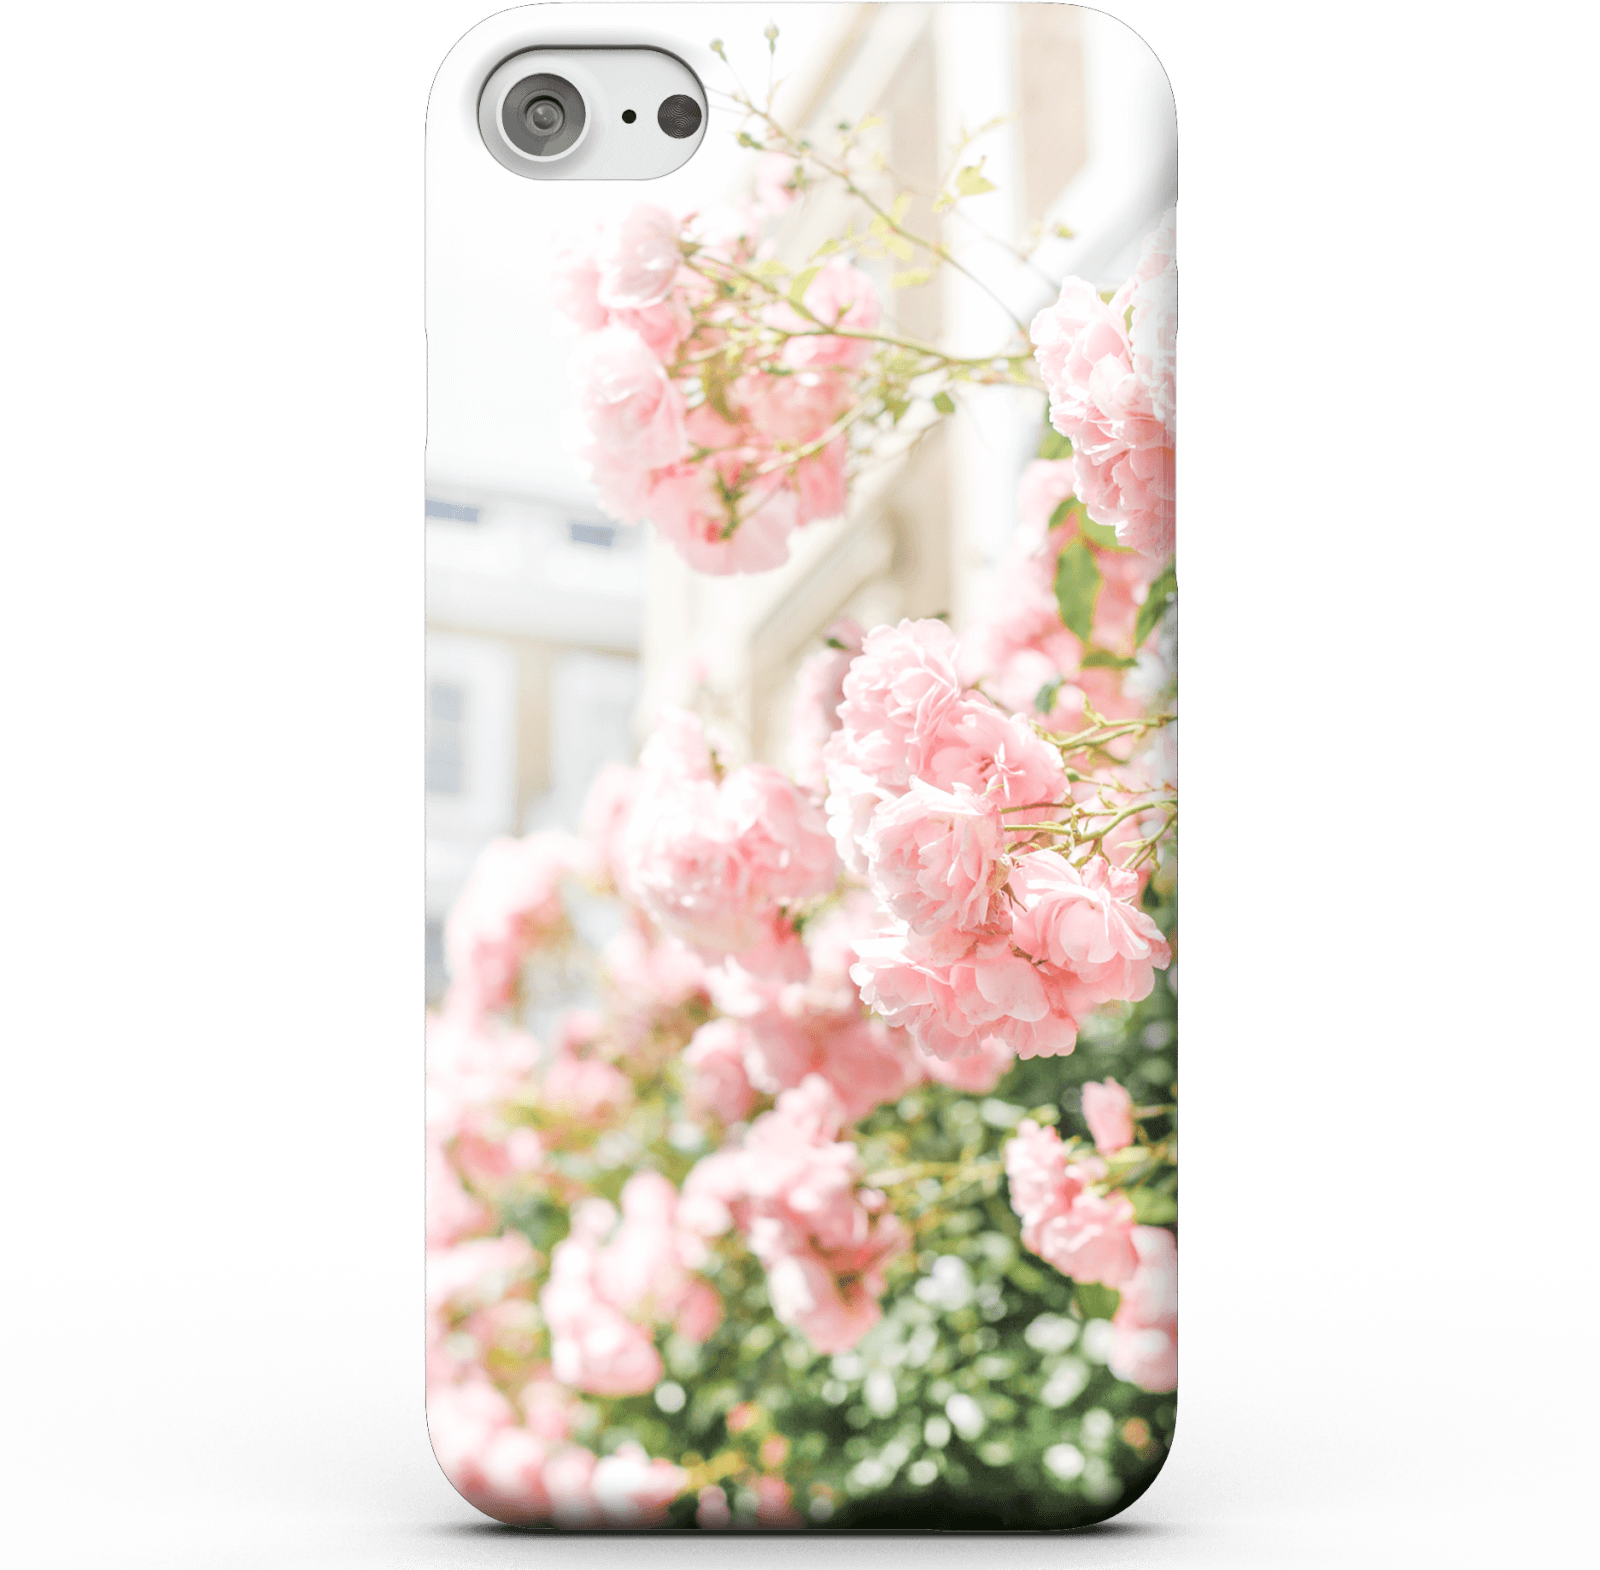 Lovely Petals Phone Case for iPhone and Android - iPhone 5/5s - Snap Case - Matte